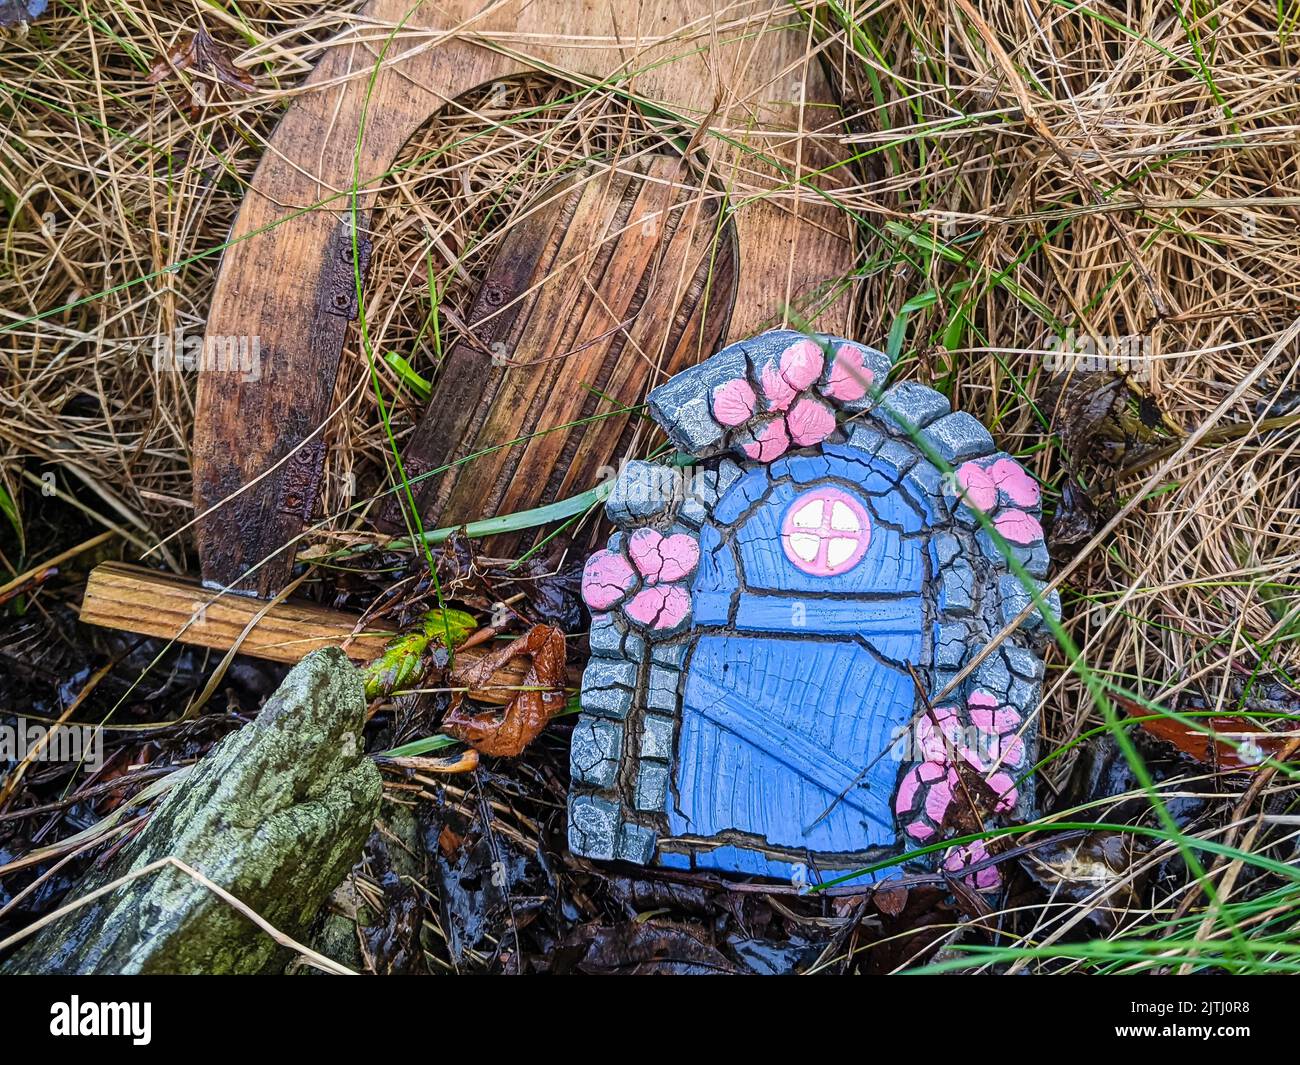 Gifts left by visitors at a 'fairy trail', Northern Ireland. Stock Photo